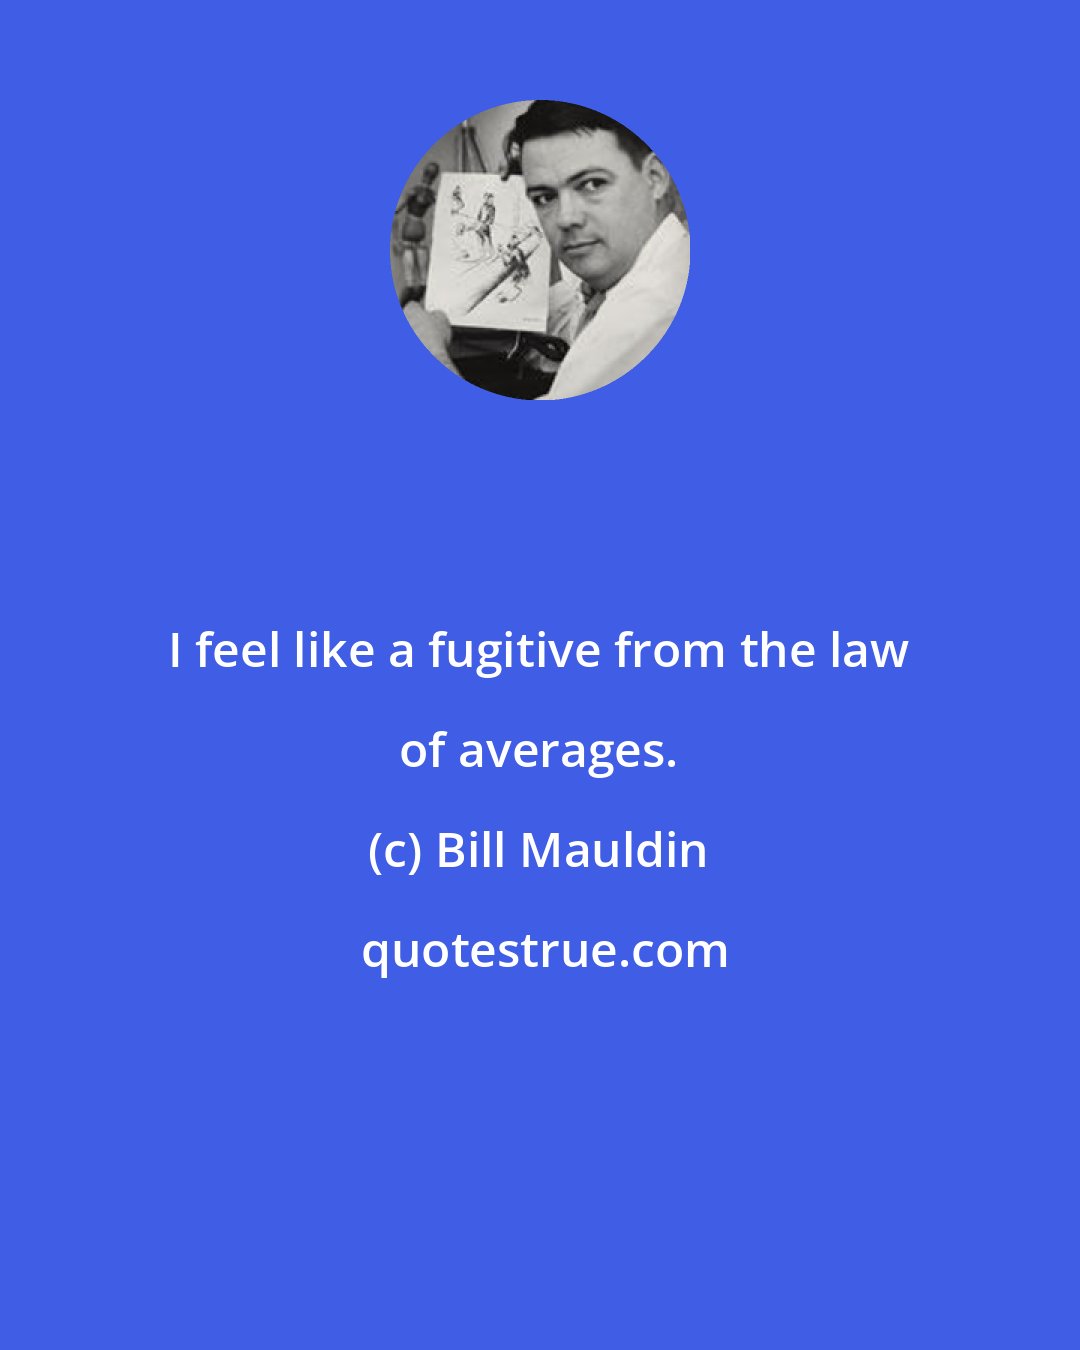 Bill Mauldin: I feel like a fugitive from the law of averages.